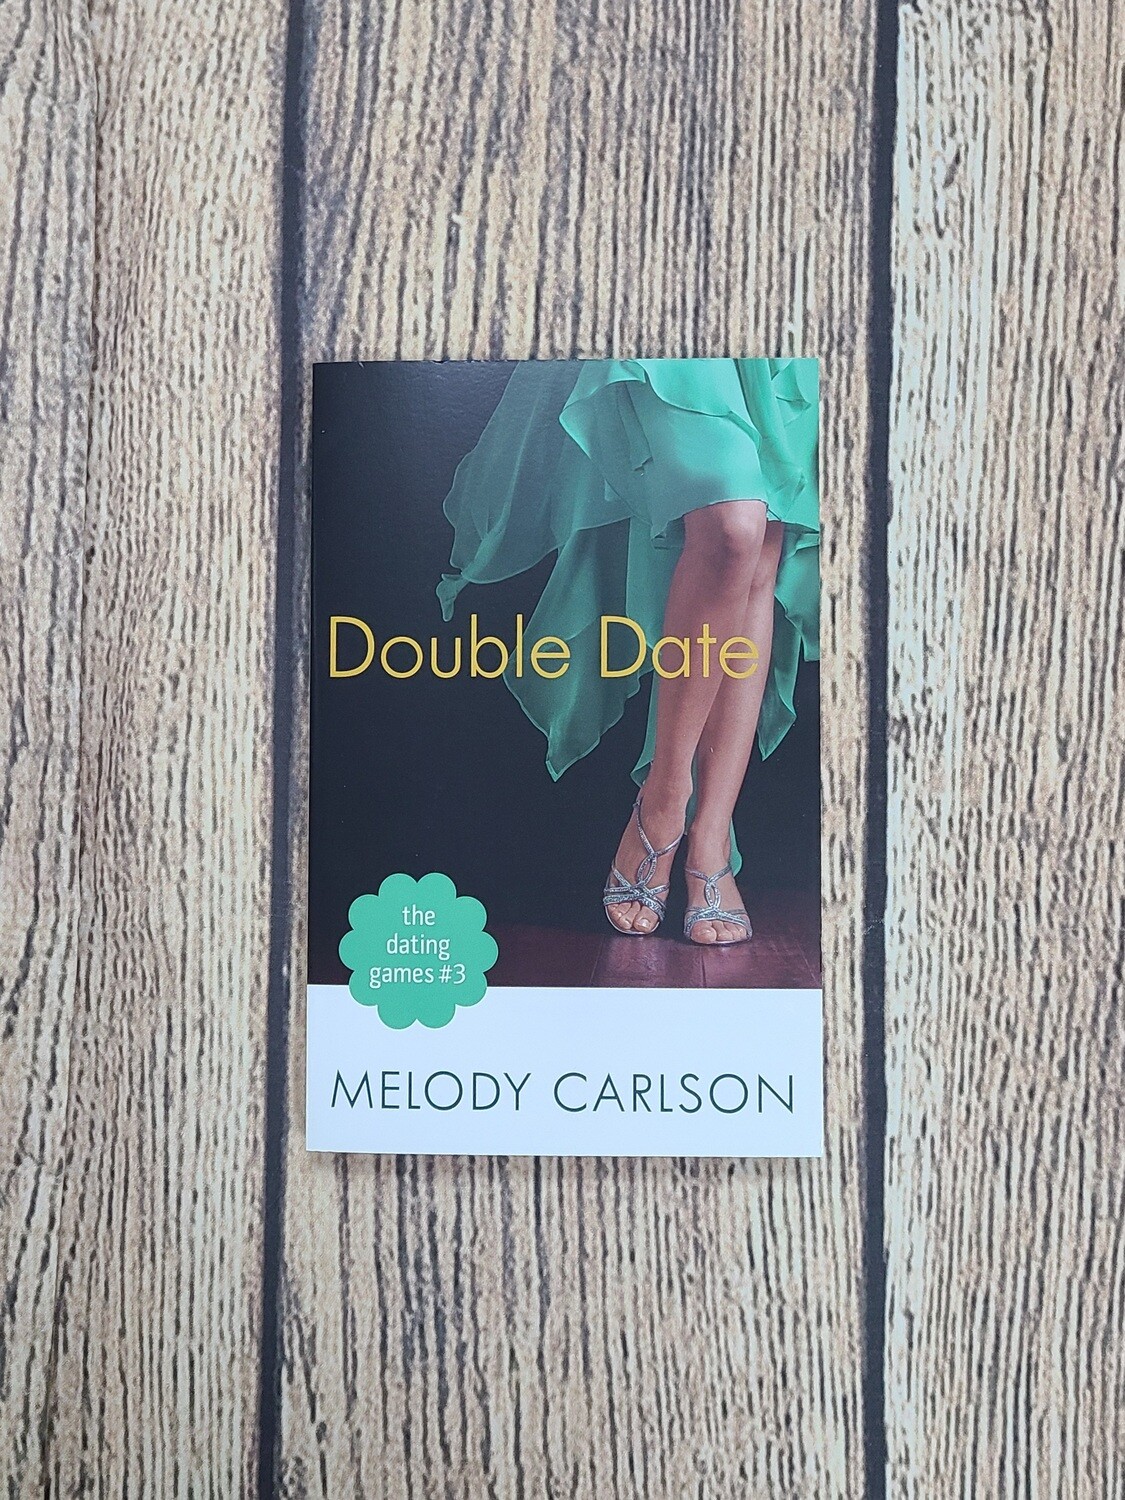 Double Date by Melody Carlson